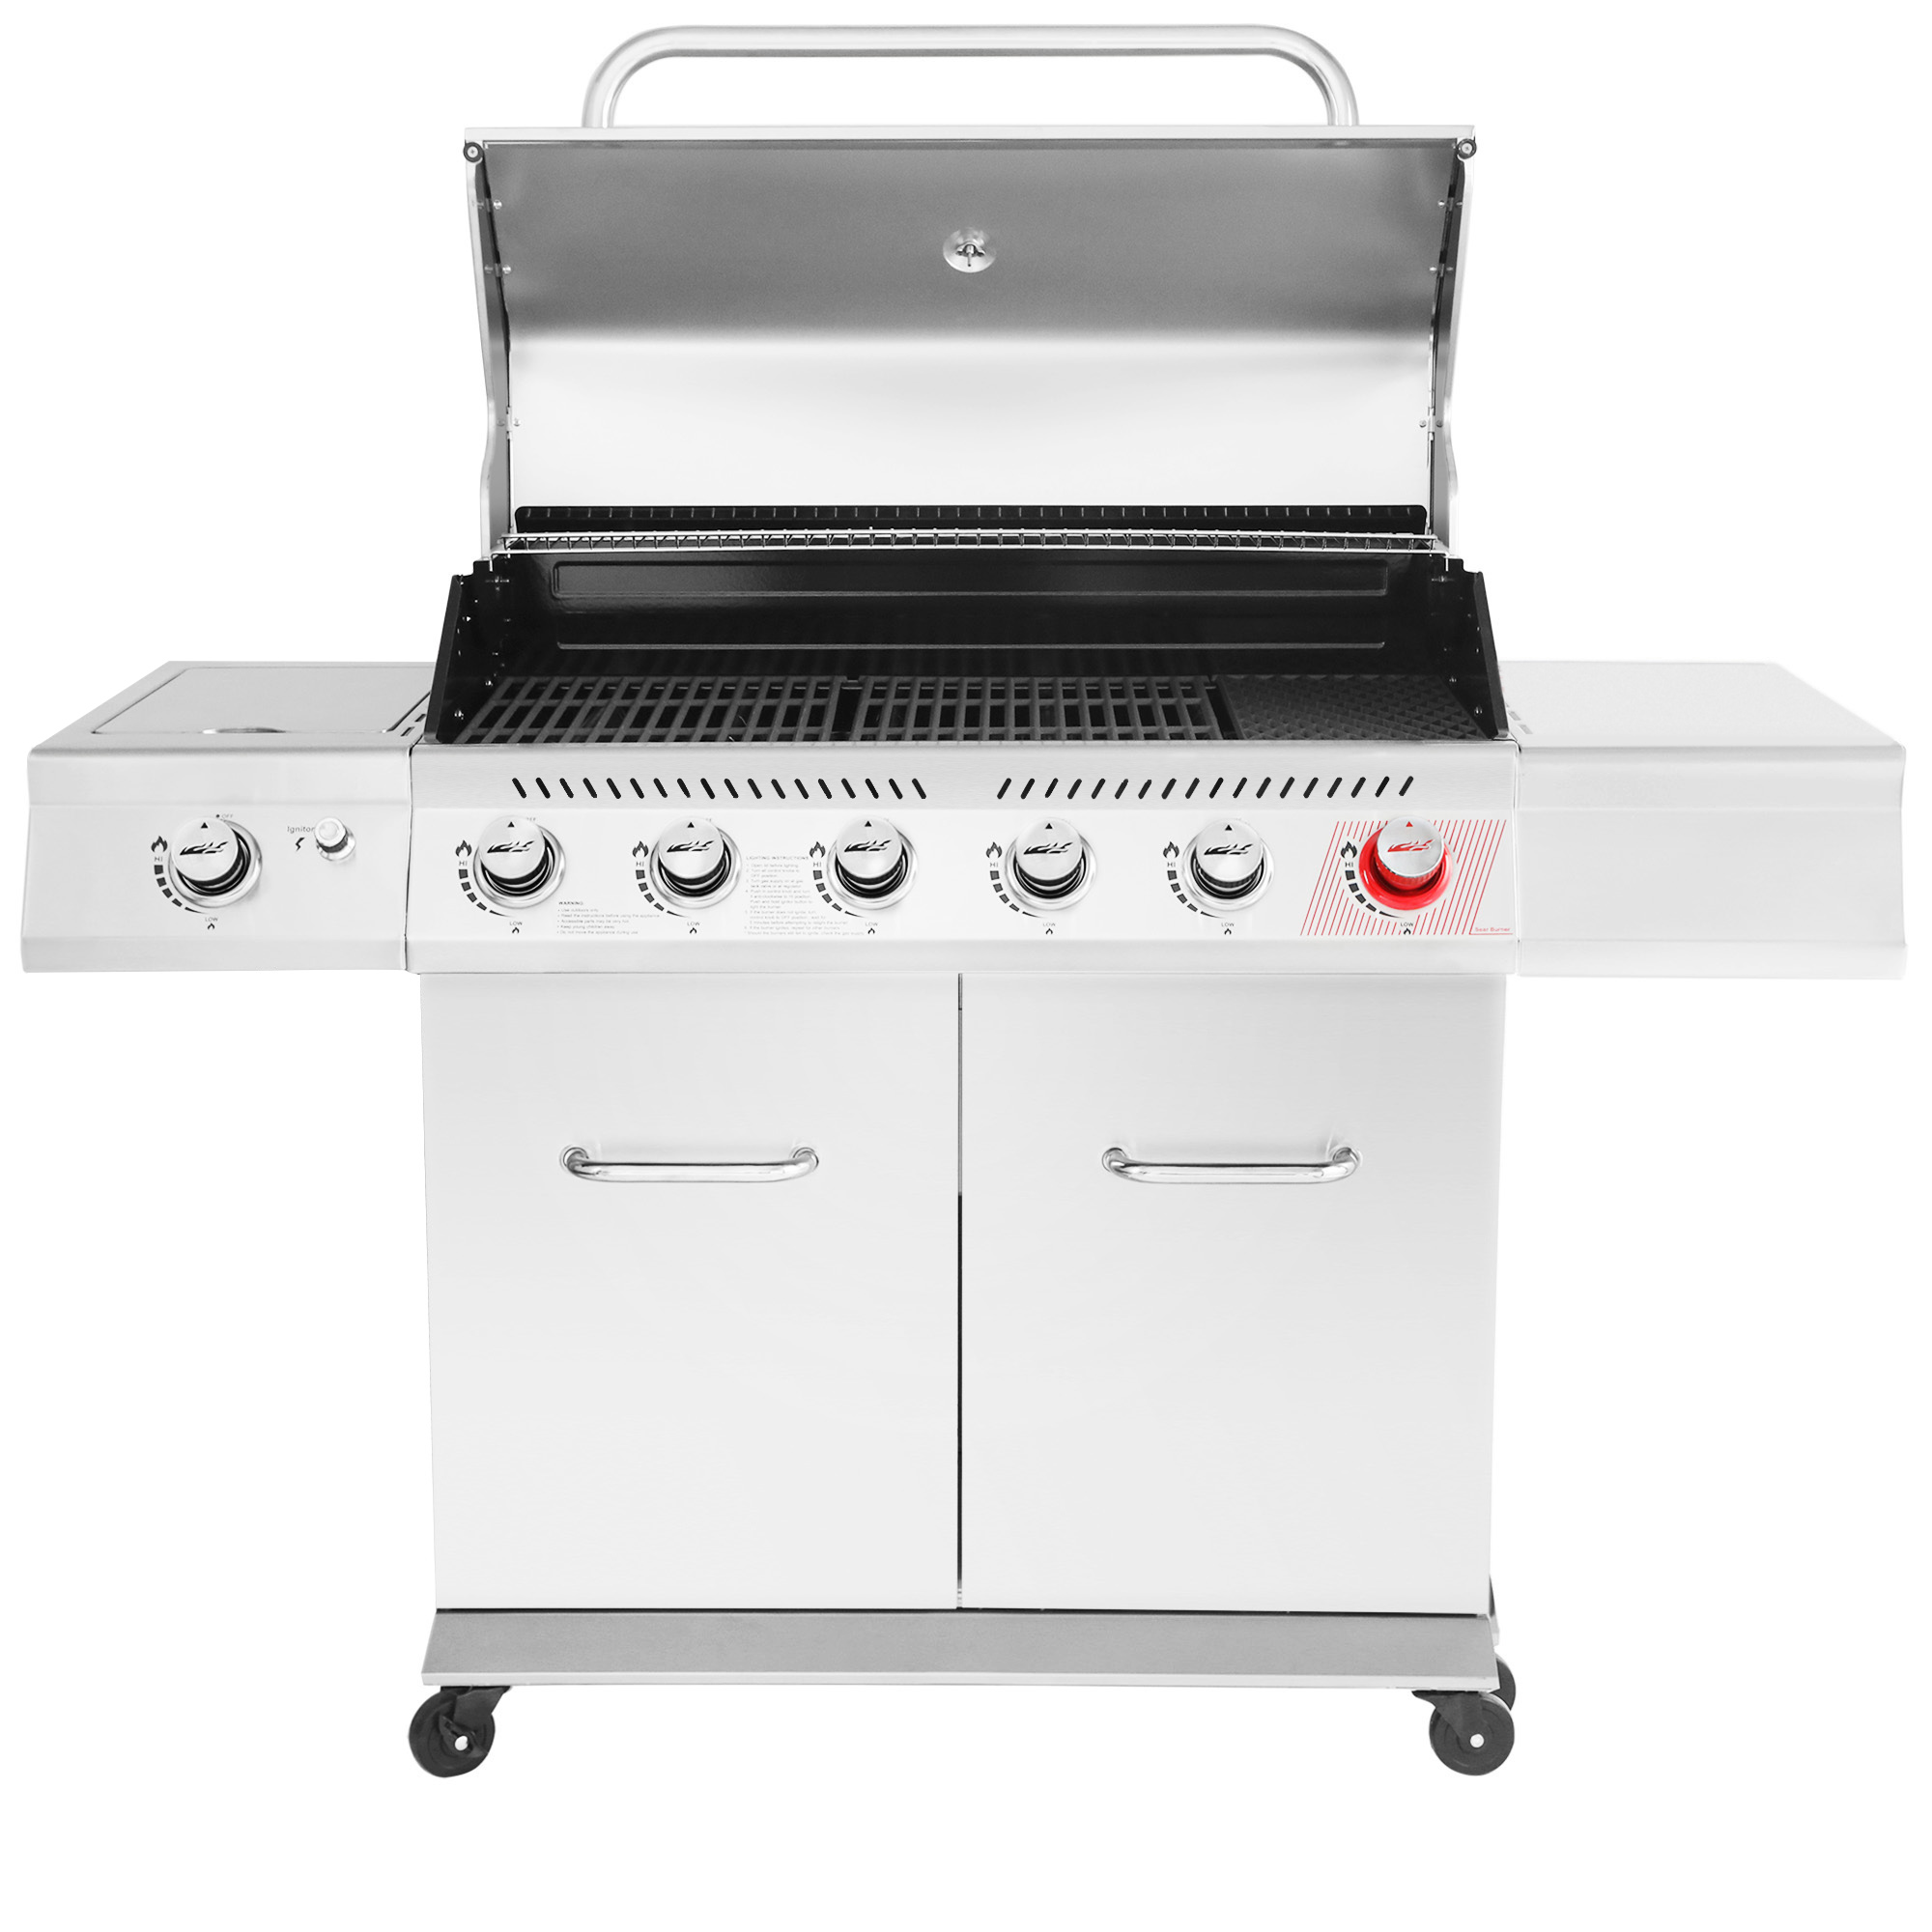 Royal Gourmet GA6402S Stainless Steel Gas Grill, Premier 6-Burner BBQ Grill with Sear Burner and Side Burner, 74,000 BTU, Cabinet Style, Outdoor Party Grill, Silver - image 2 of 9